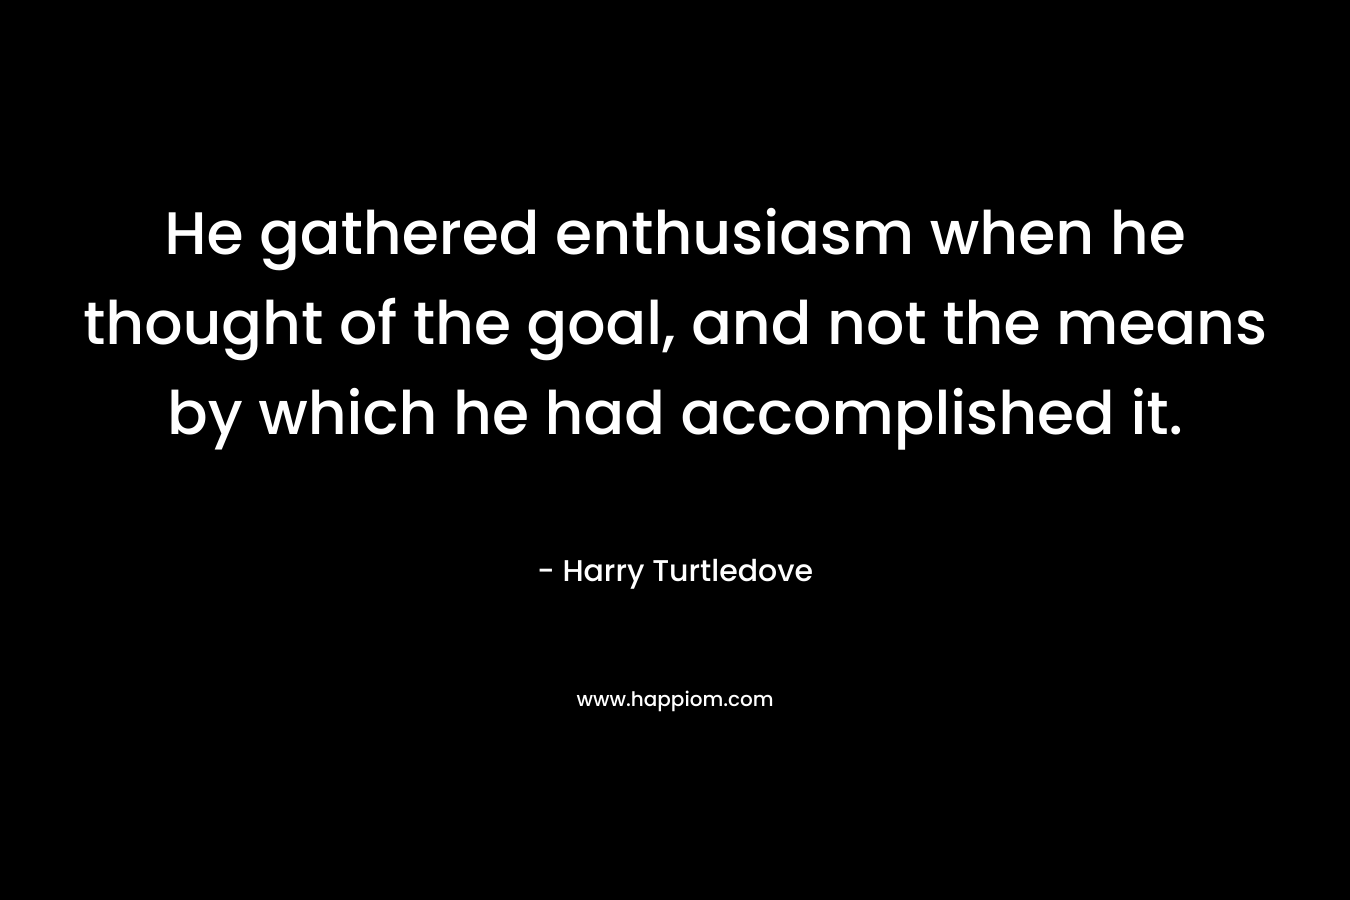 He gathered enthusiasm when he thought of the goal, and not the means by which he had accomplished it. – Harry Turtledove